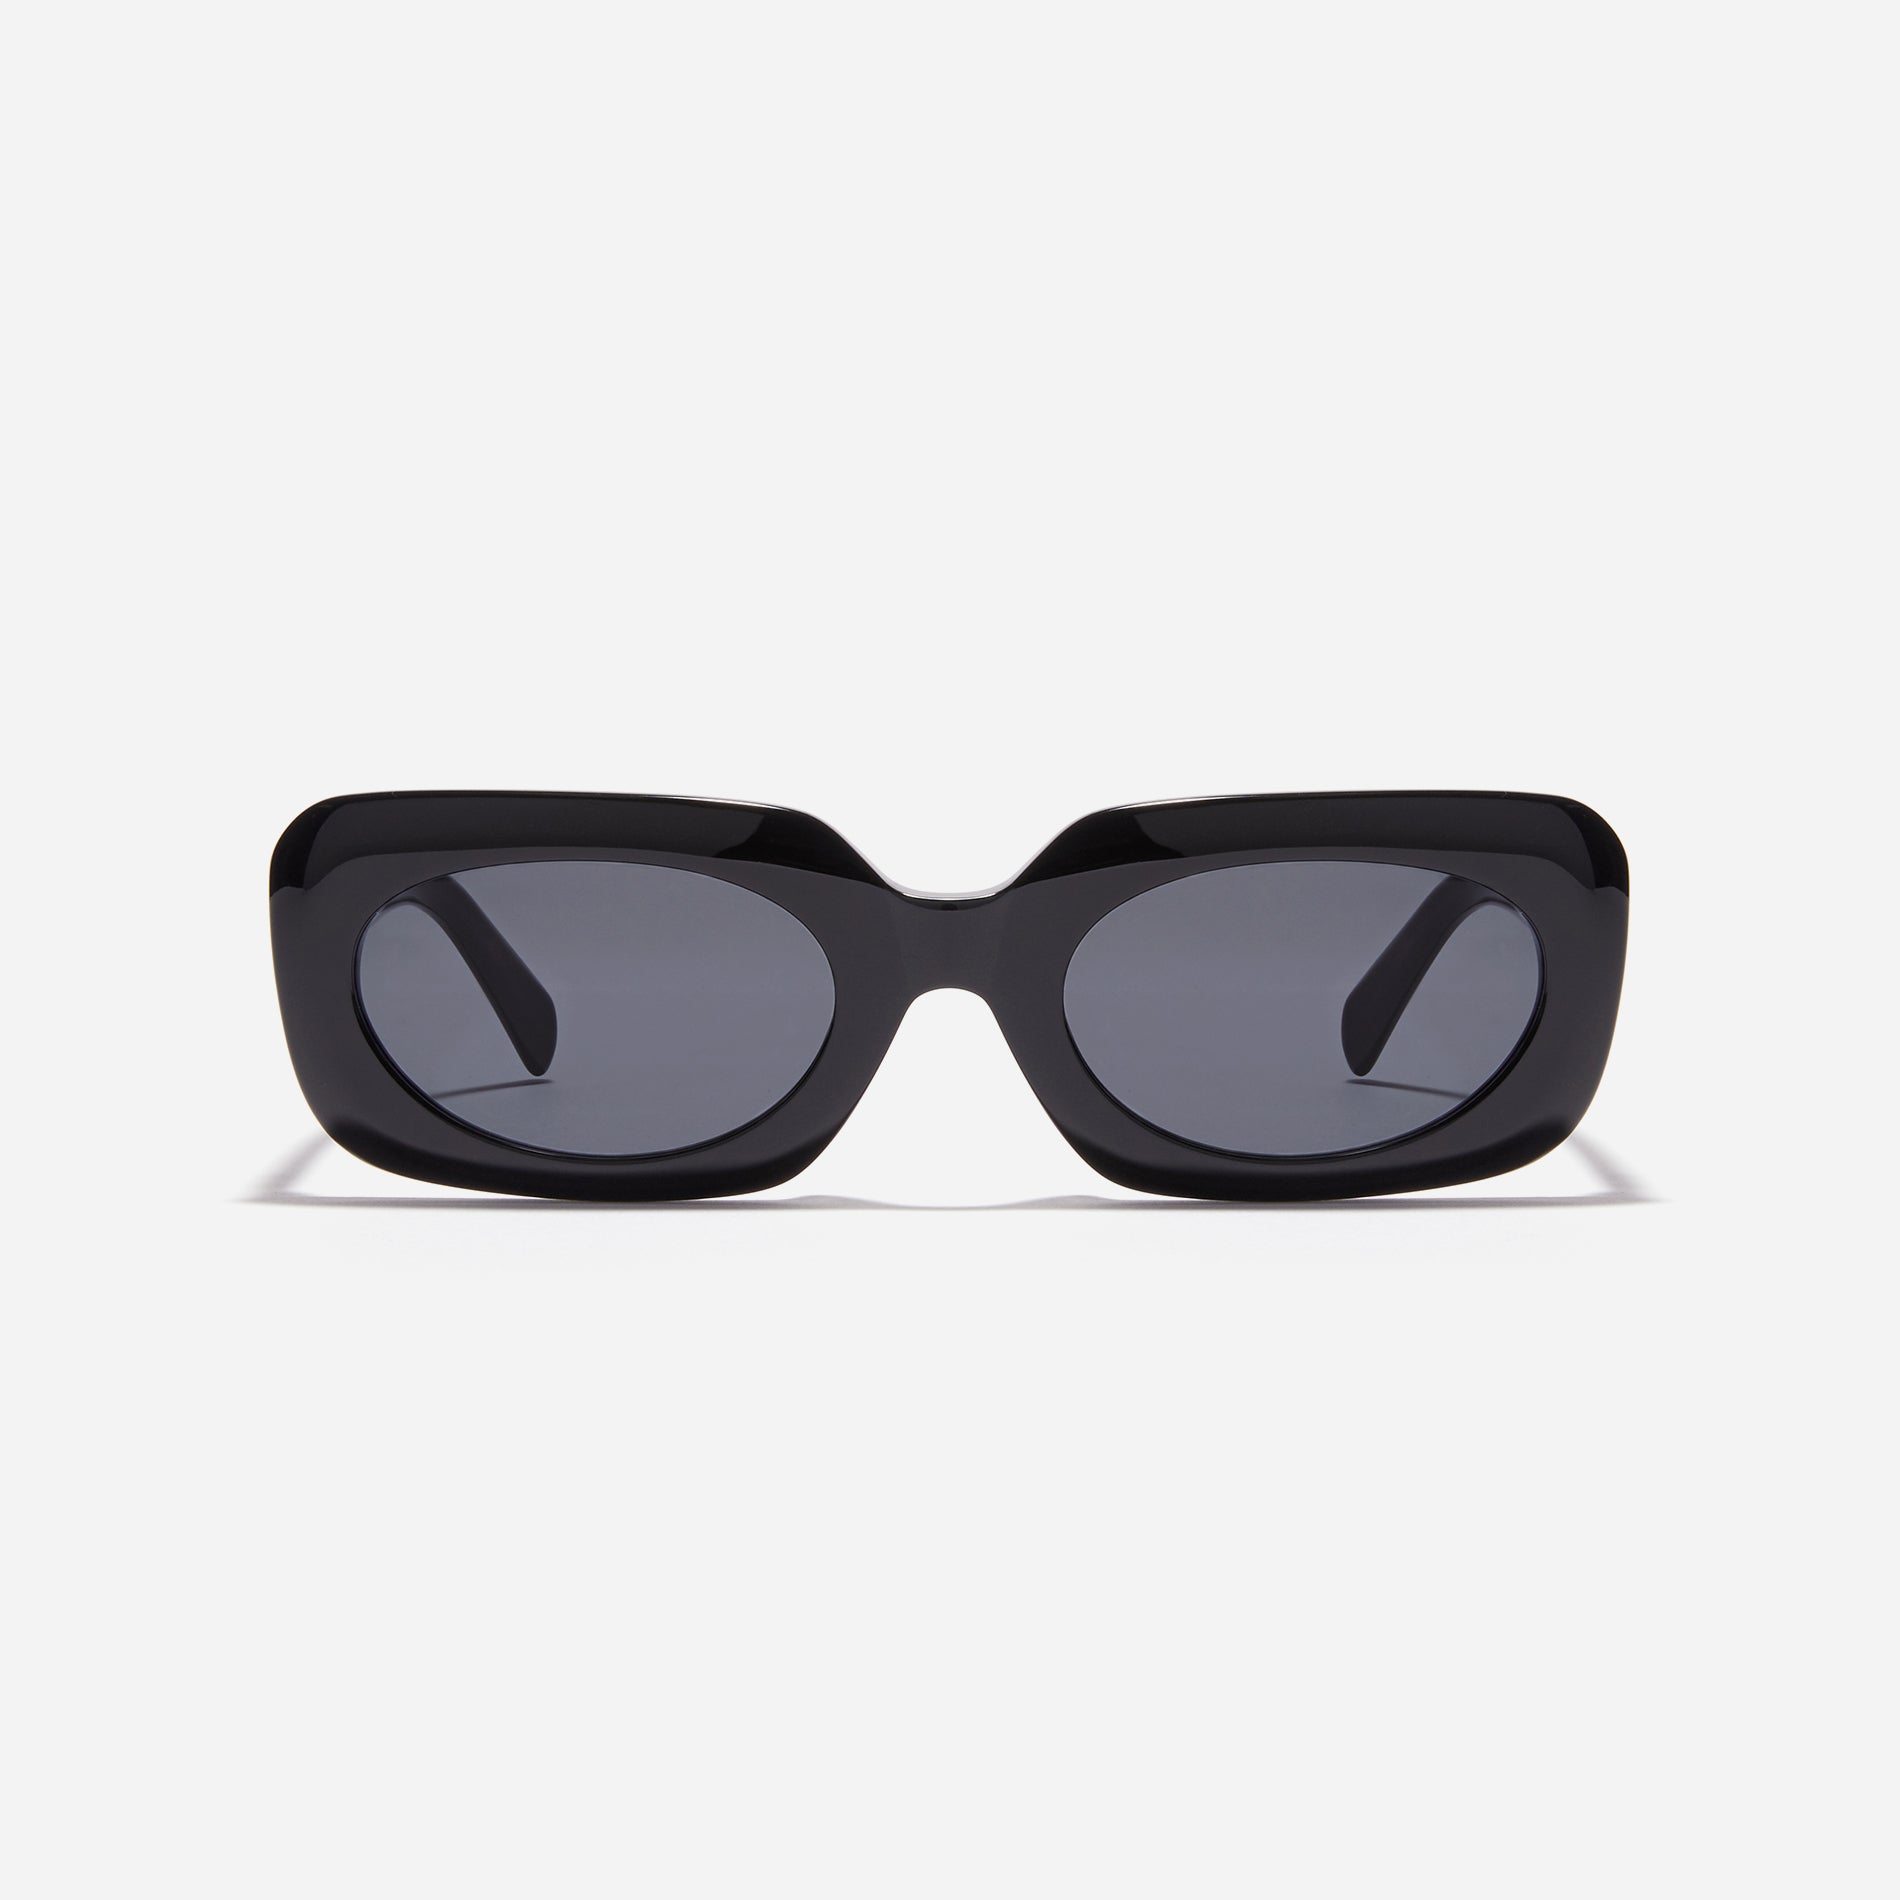 Born from the CARIN x OIOICOLLECTION collaboration, the ROUND sunglasses are designed with a sleek narrow rim style that gives a modern twist to the '90s retro vibe. The temples showcase a newly redesigned OIC logo emblem, highlighted by a soft color palette, adding a touch of fashion-forward style.